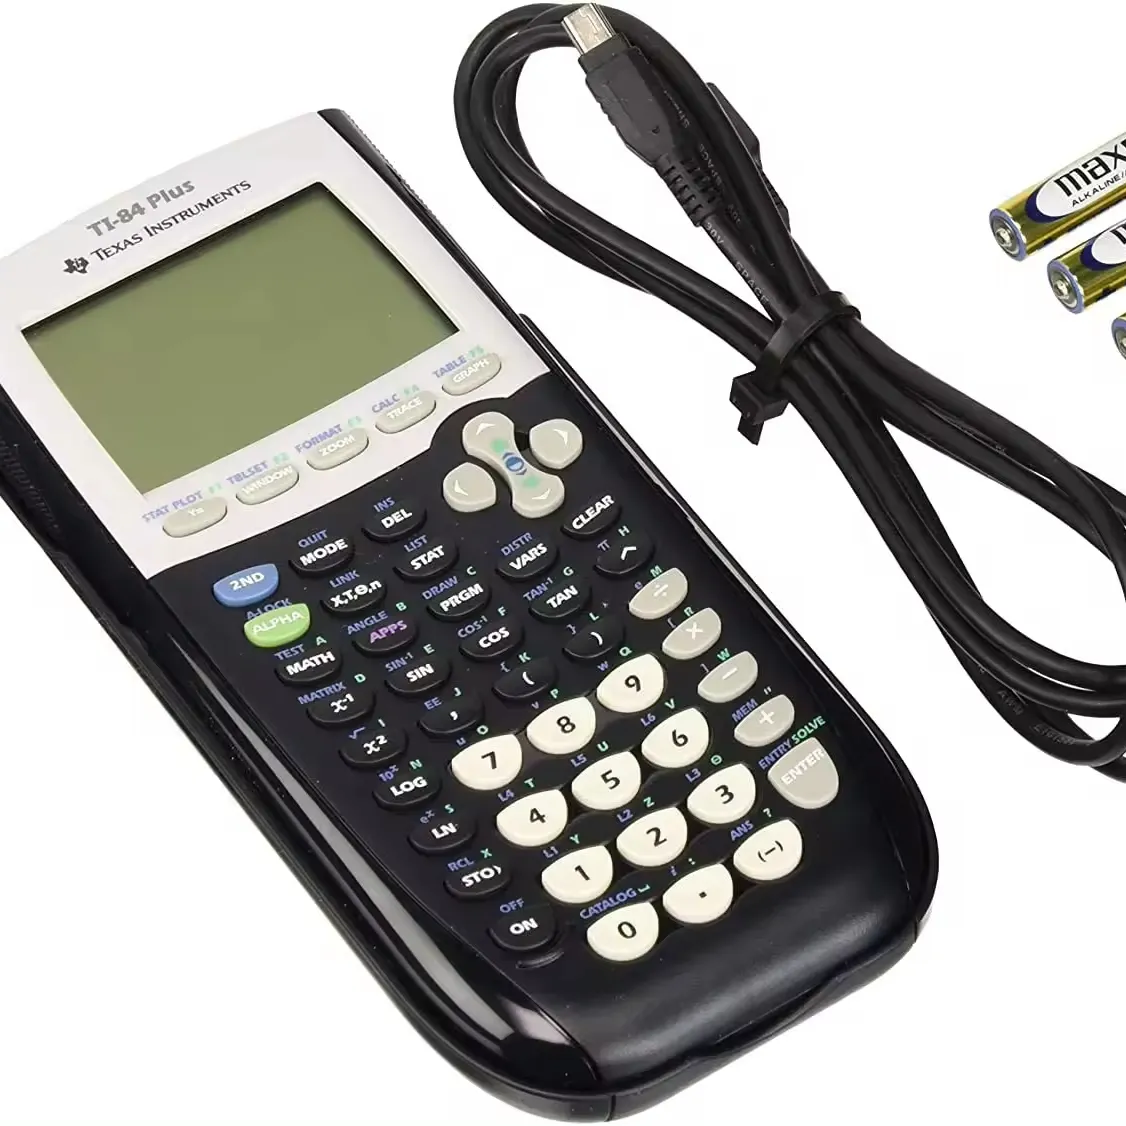 Authentic Texas Instruments Ti-84 Plus Graphics Calculator For Sale With Complete Parts And Accessories